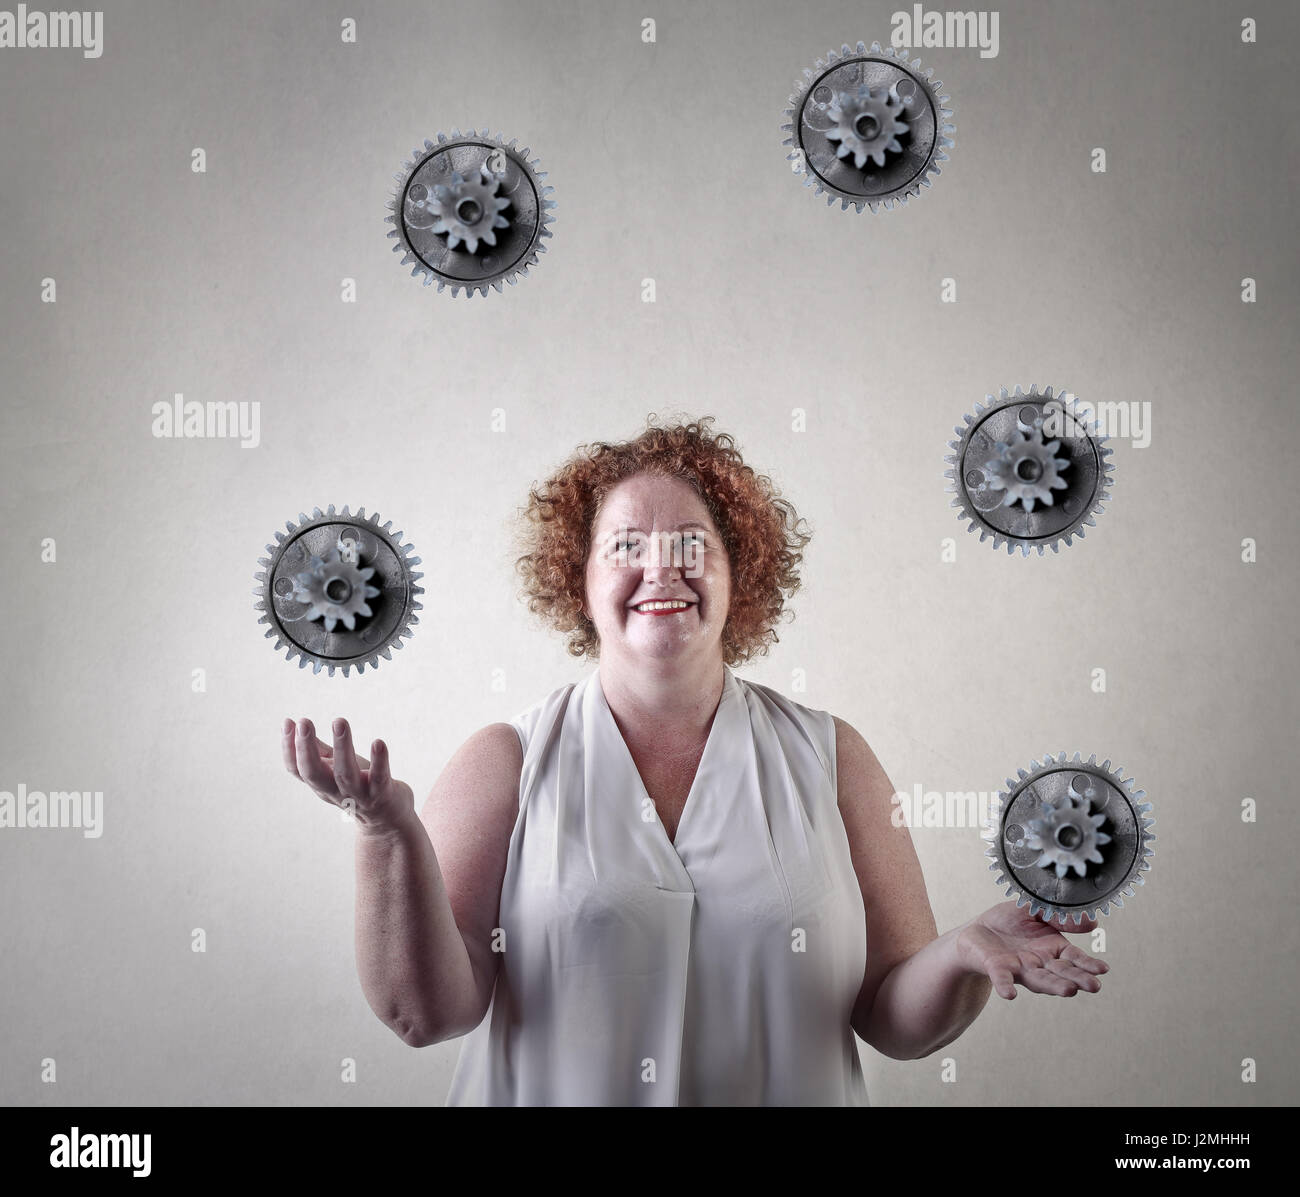 Woman juggling with gears Stock Photo